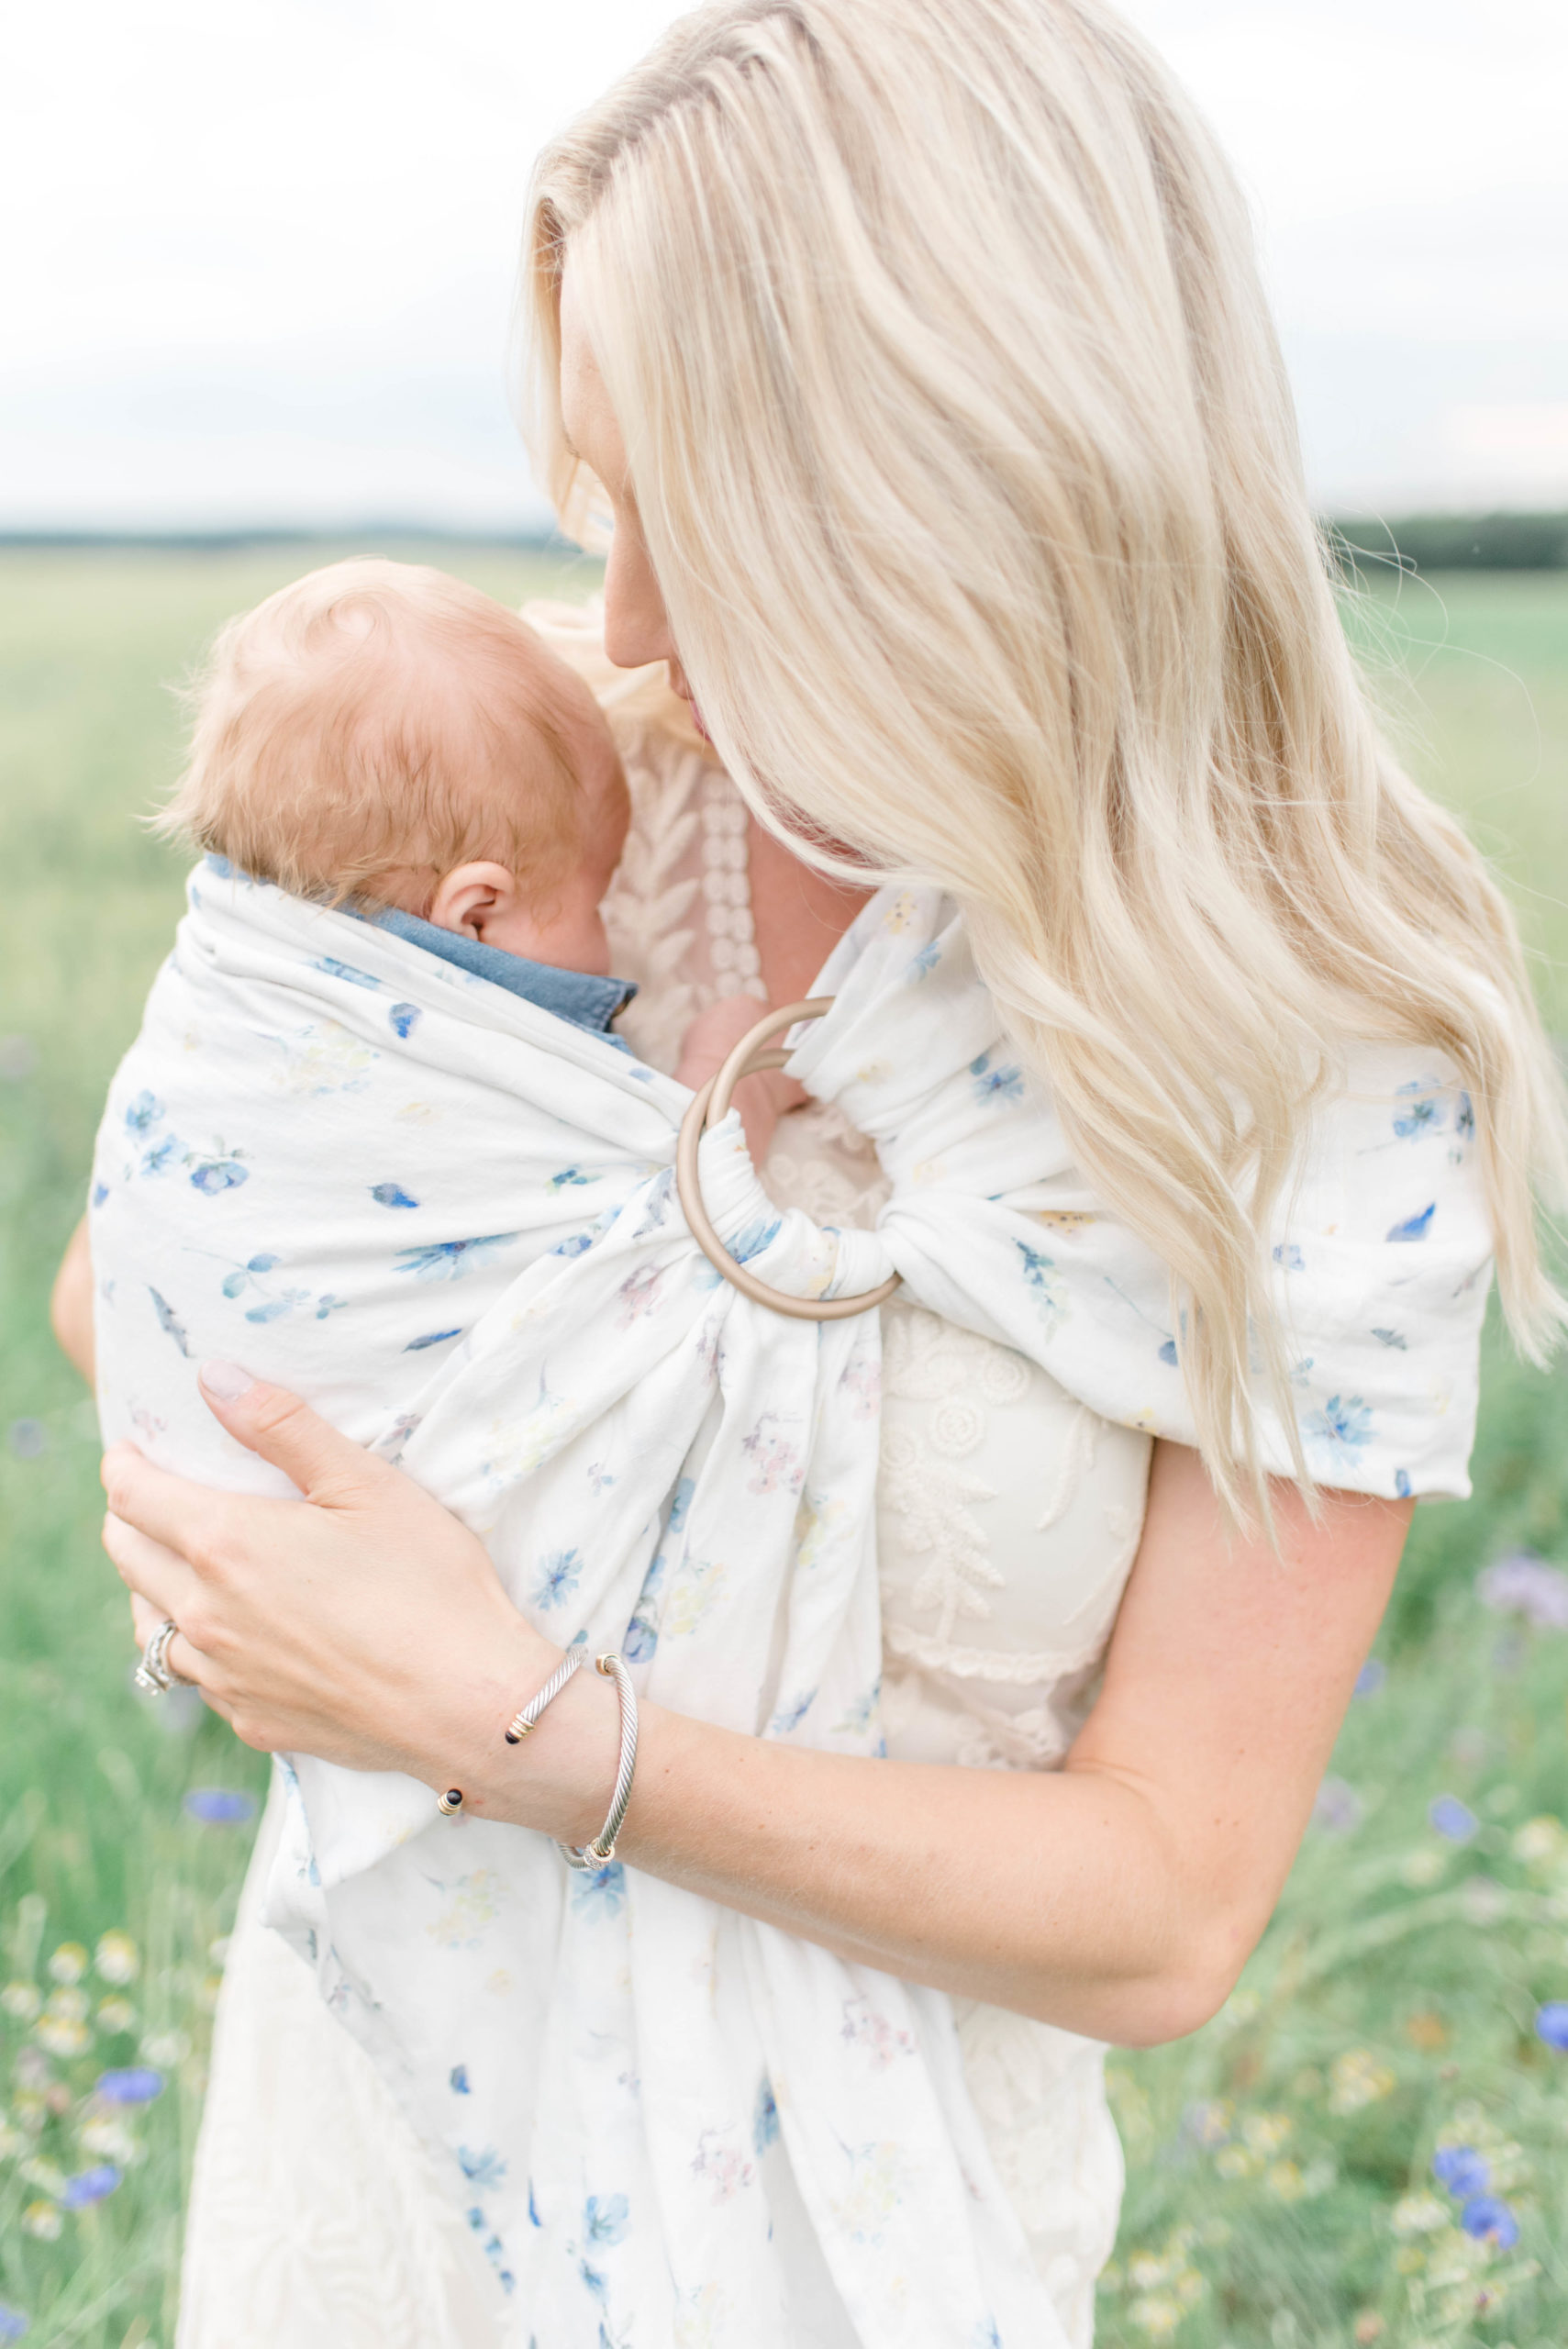 LoveHeld ring slings are perfect for new mommas.